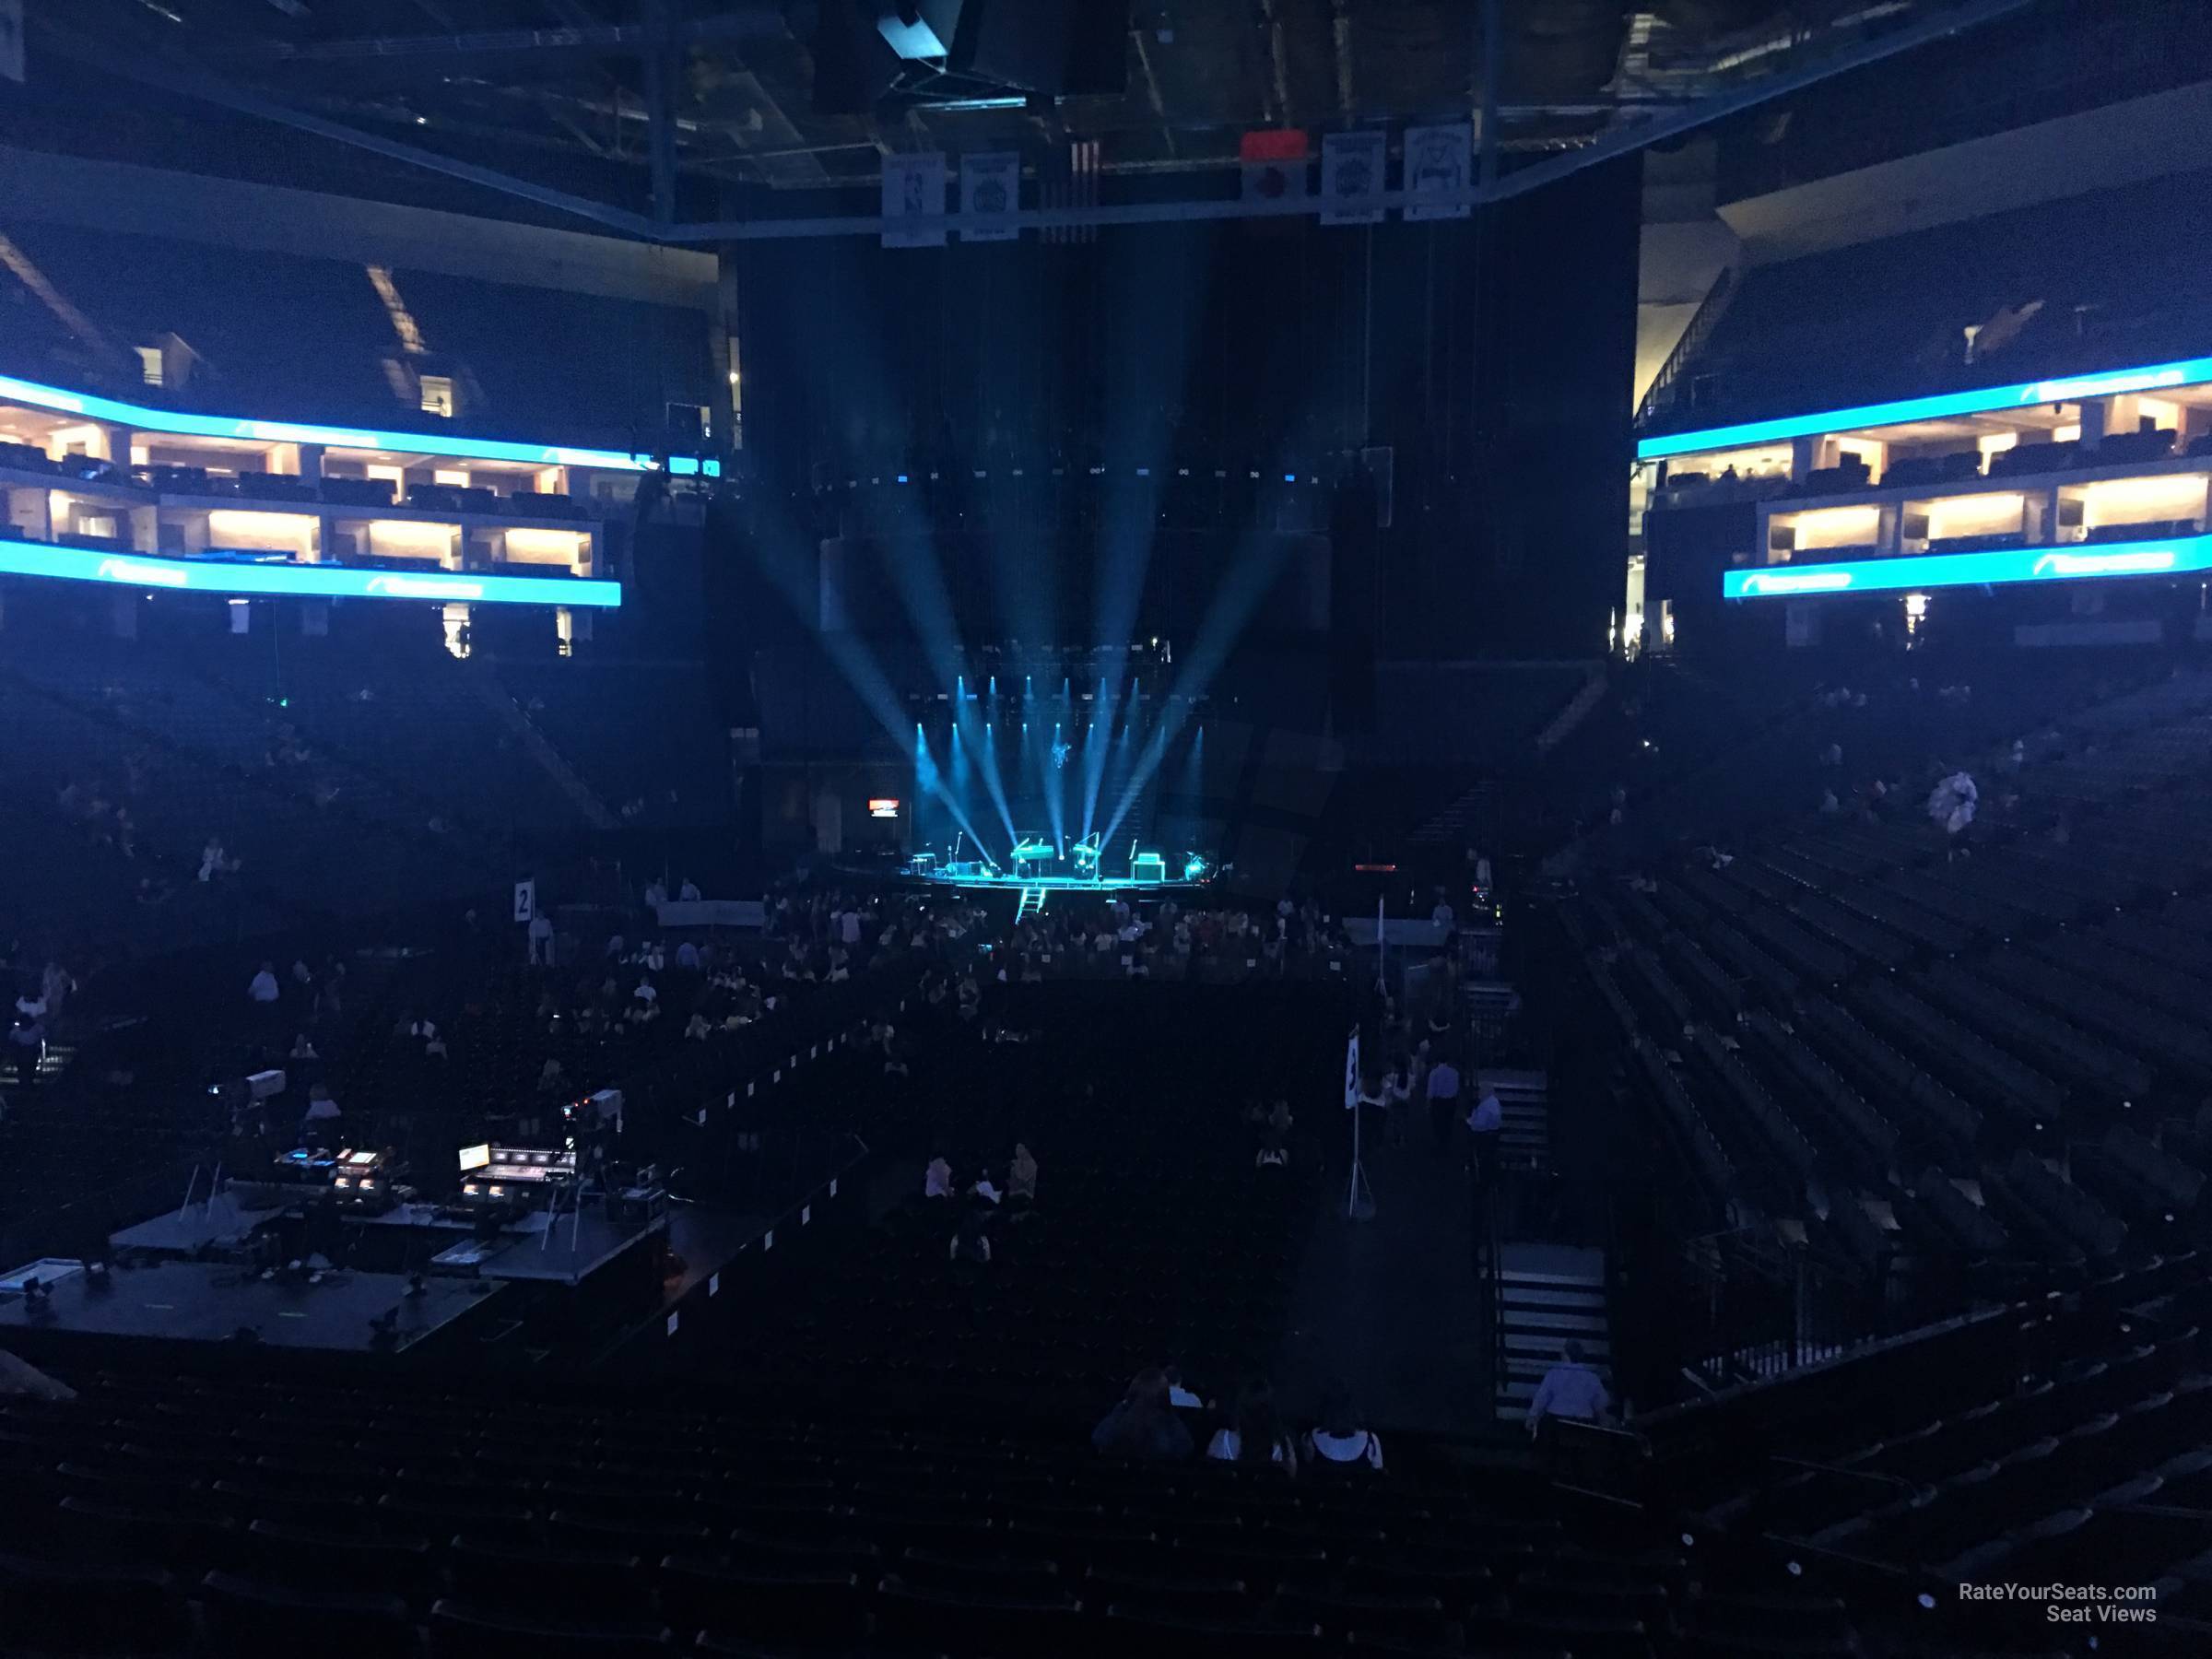 section 112, row m seat view  for concert - golden 1 center